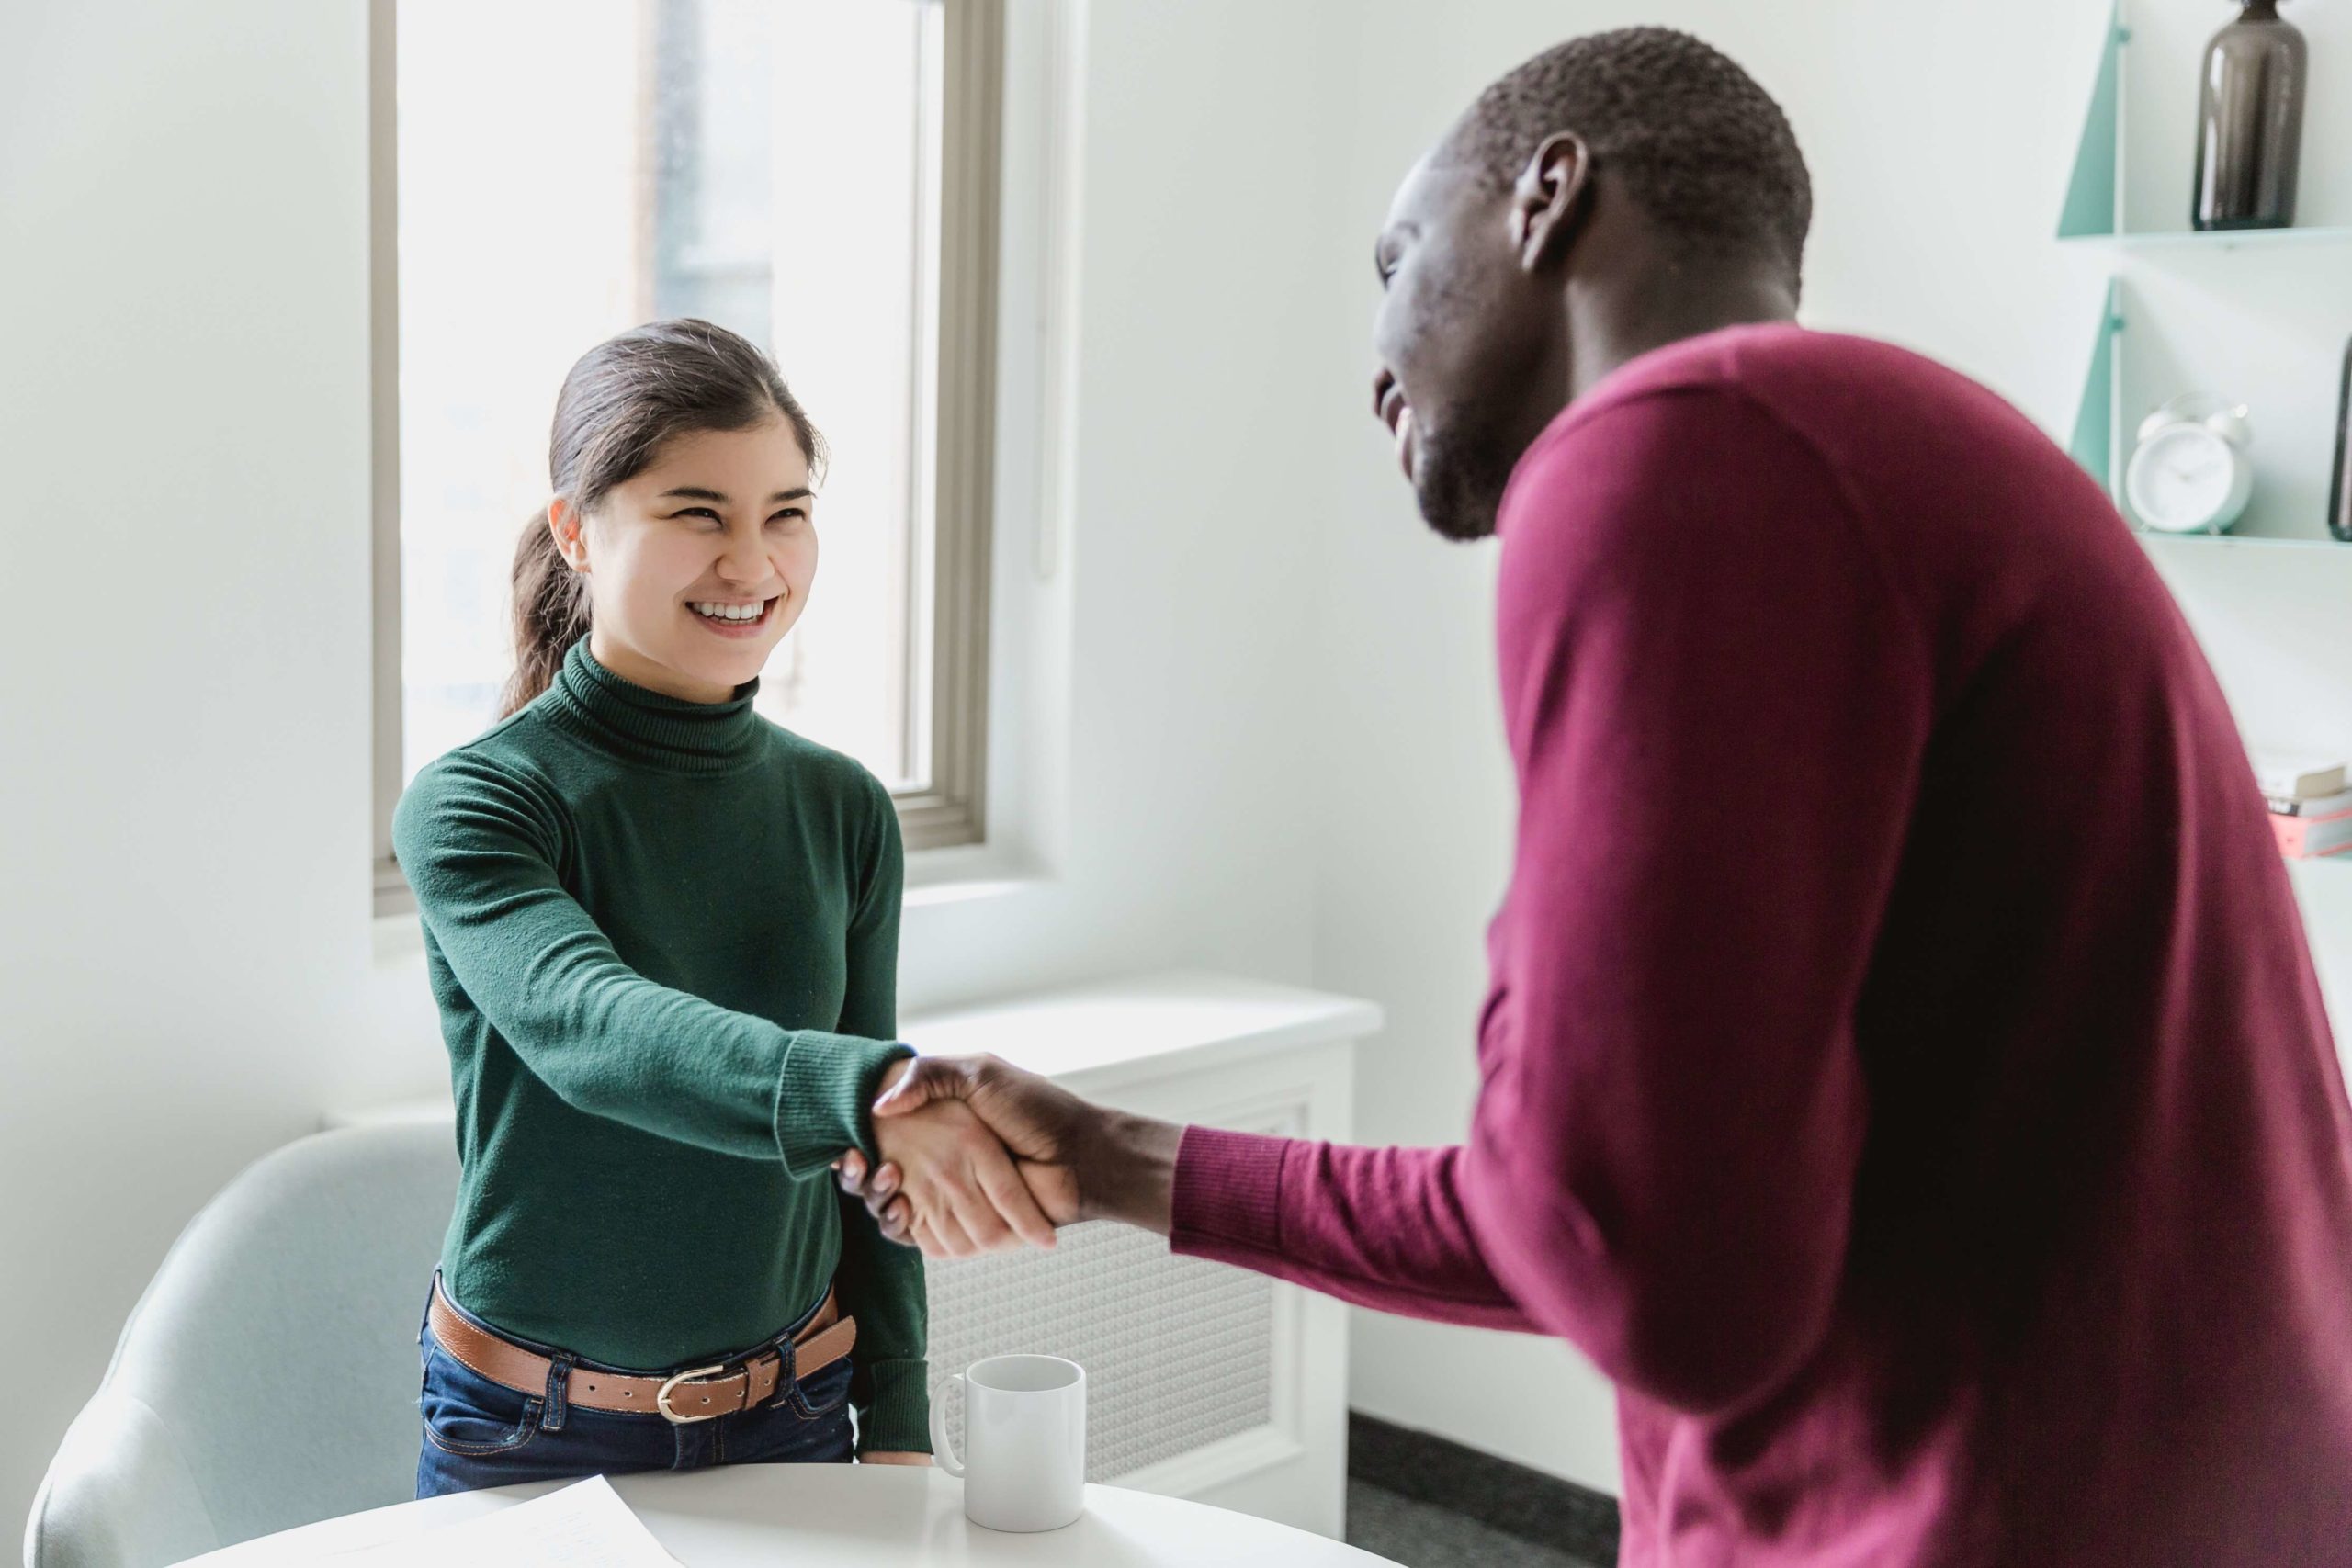 Tenant and Landlord shaking hands